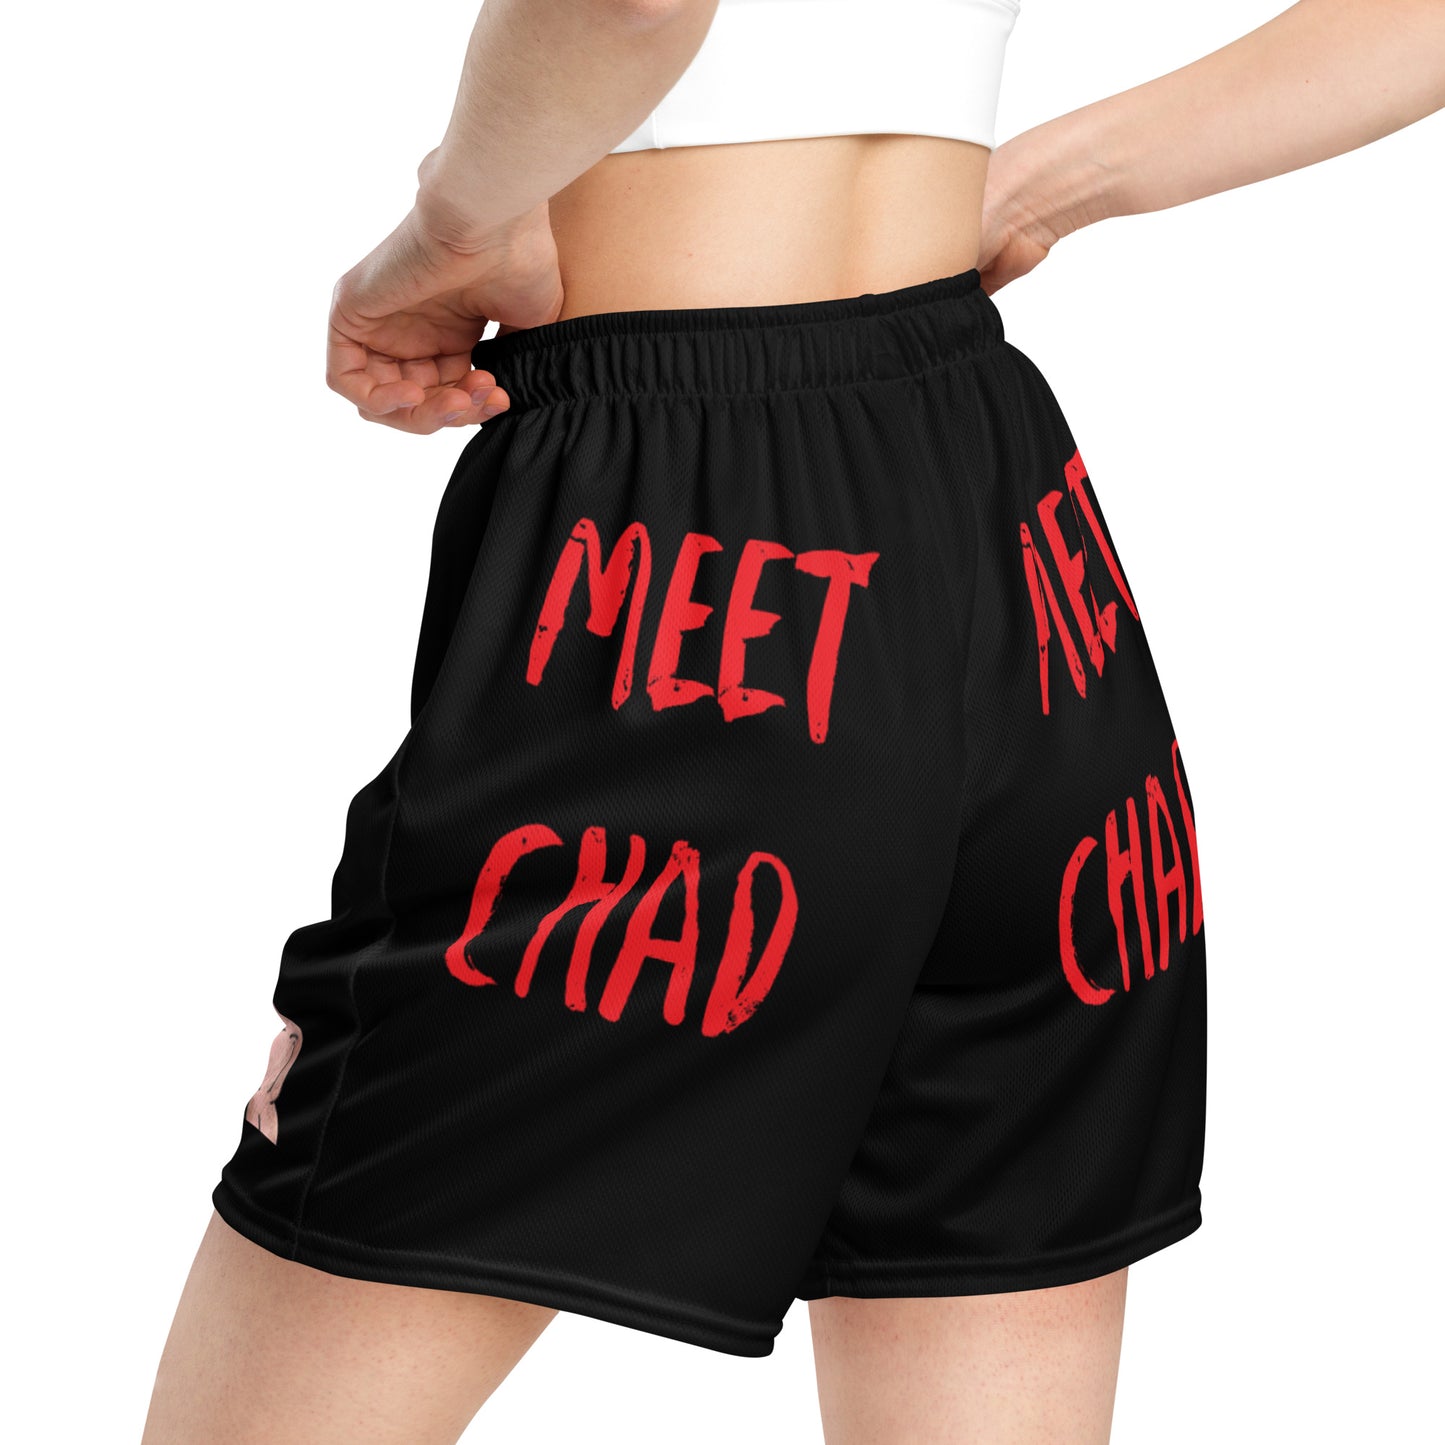 Meet Chad Recycled Unisex Mesh Shorts